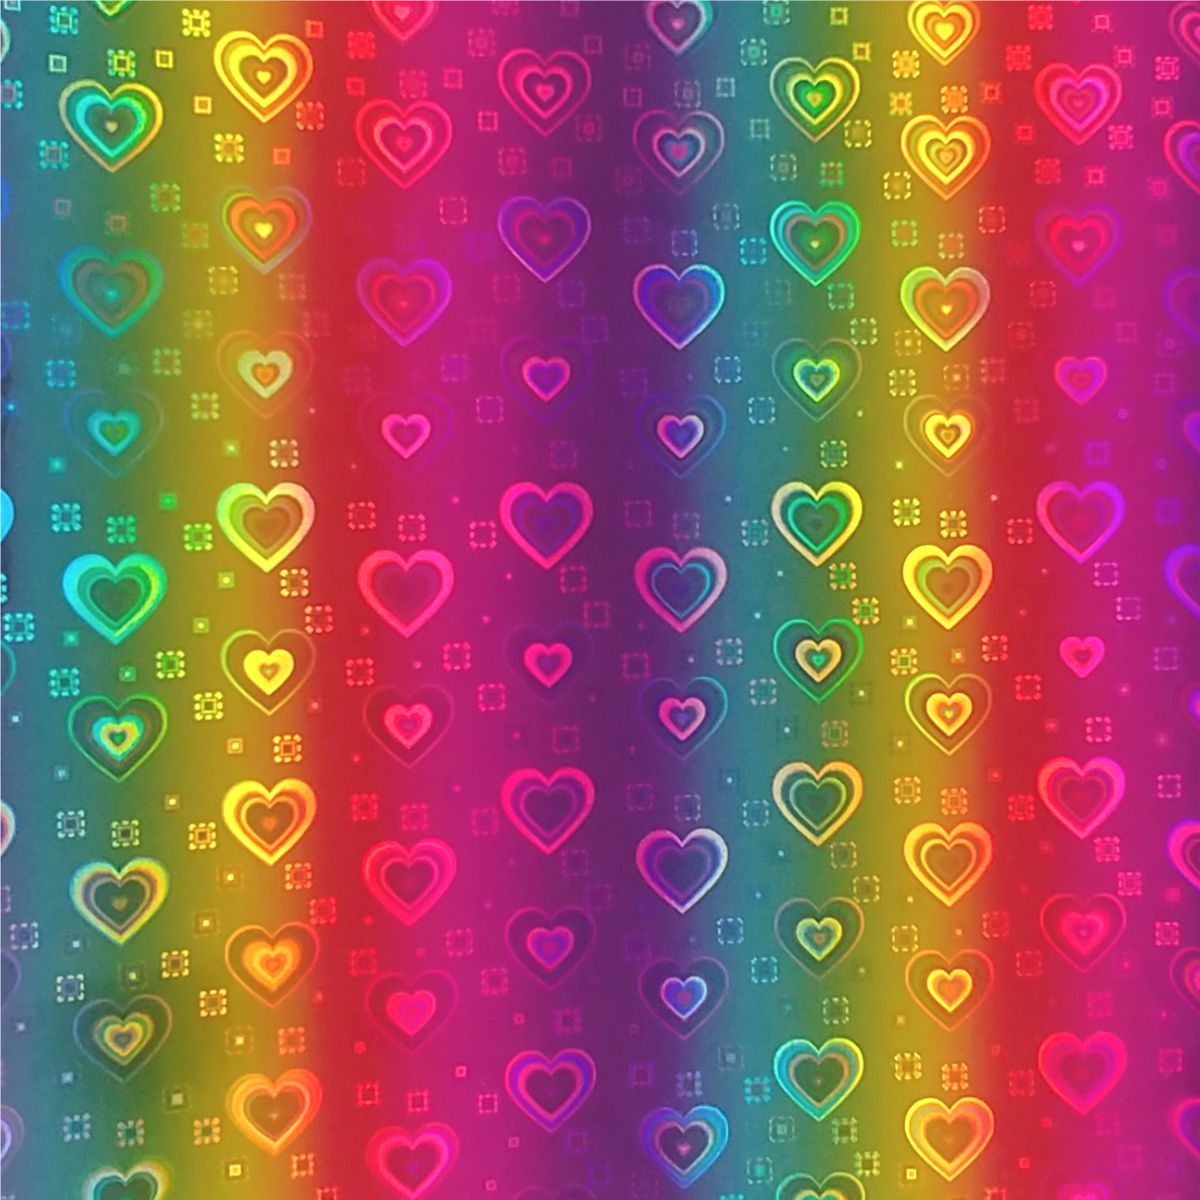 Rainbow Hearts Adhesive Vinyl Choose Your Length SALE While Supplies Last